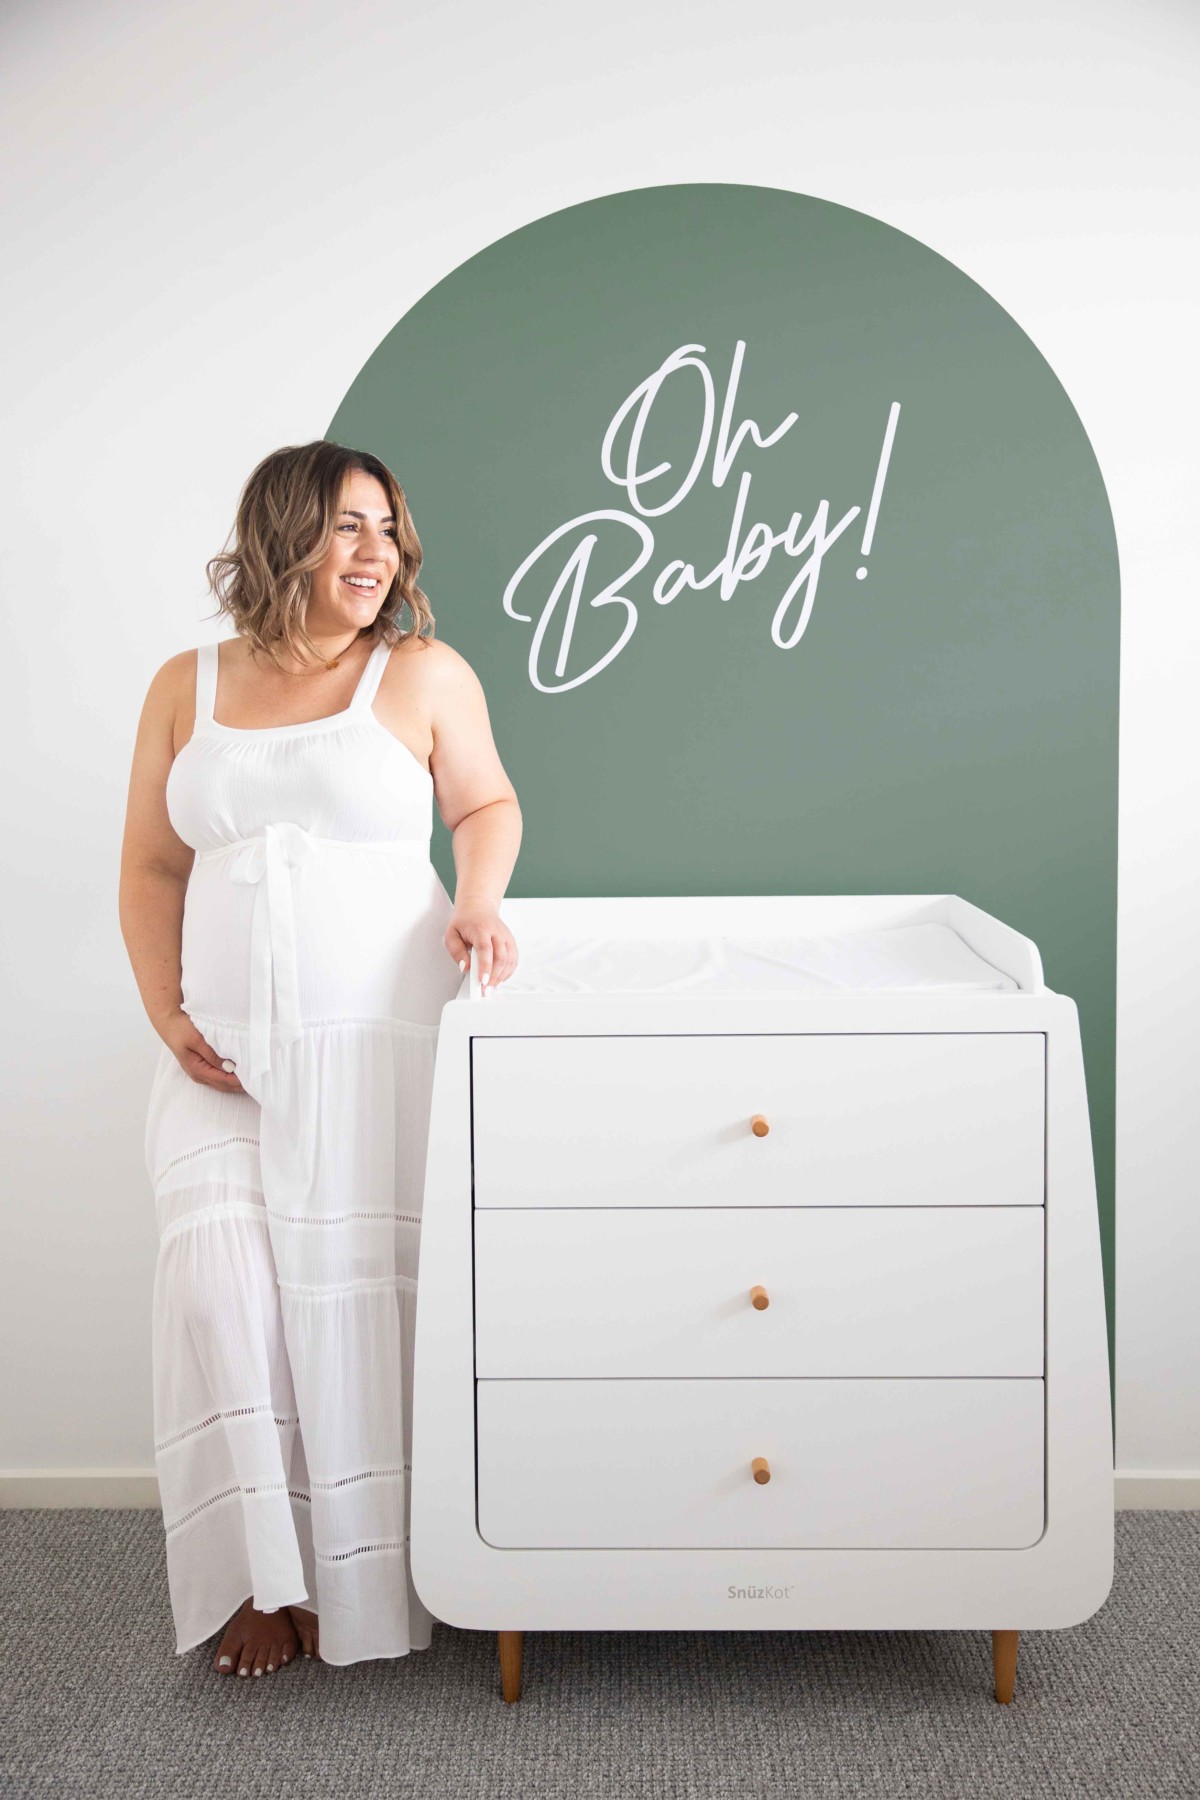 Oh Baby! Arch | Kids Wall Decal